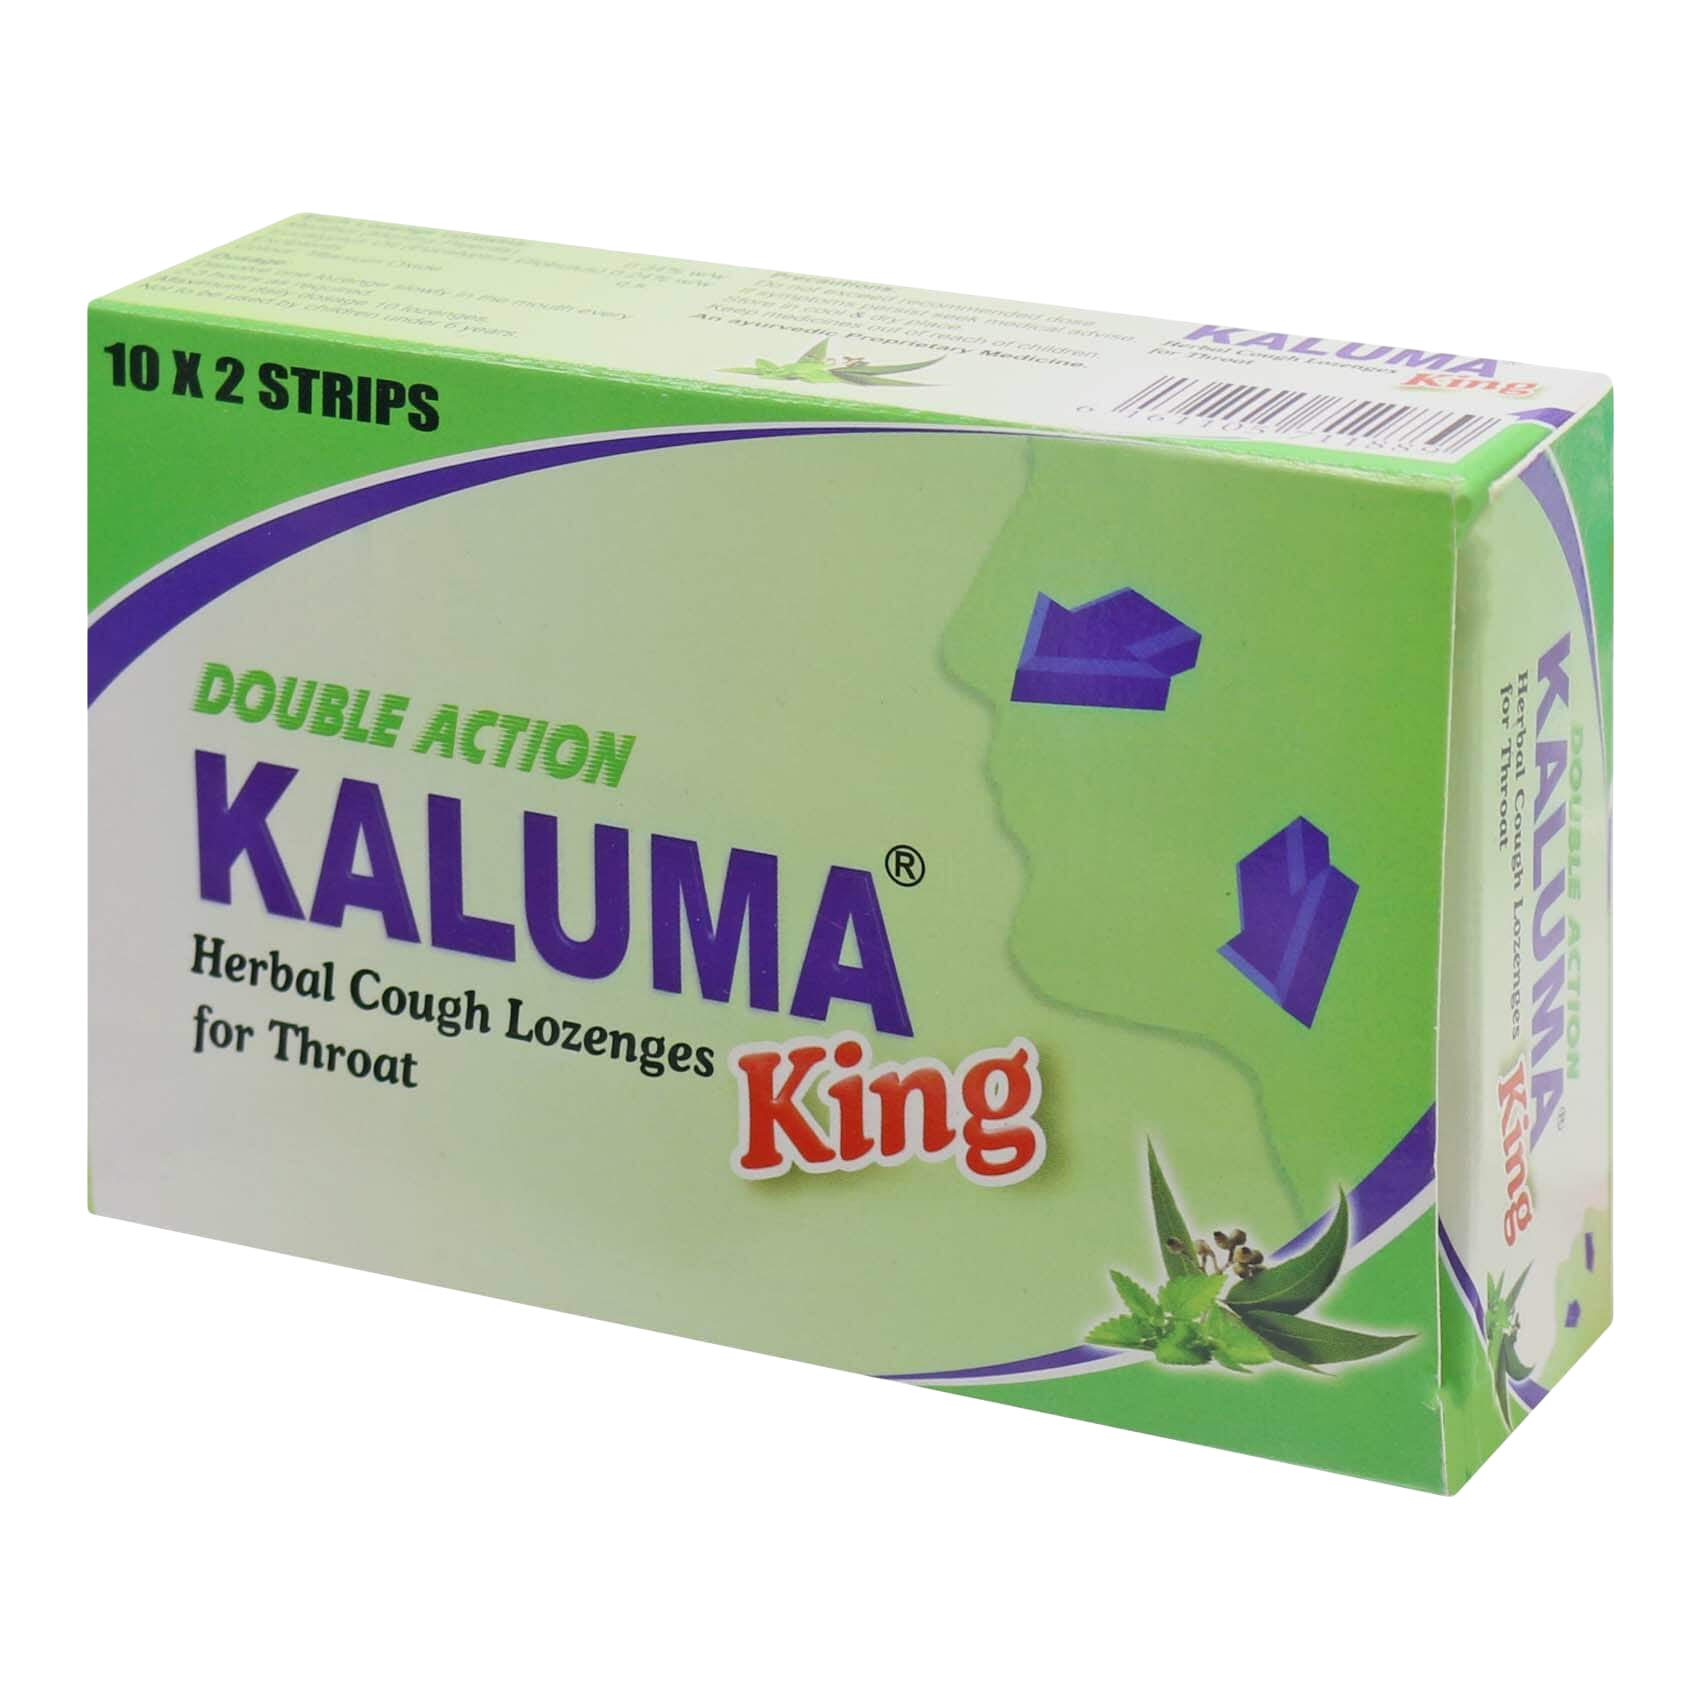 Kaluma Herbal Cough Lozenges For Throat King 20 Pieces